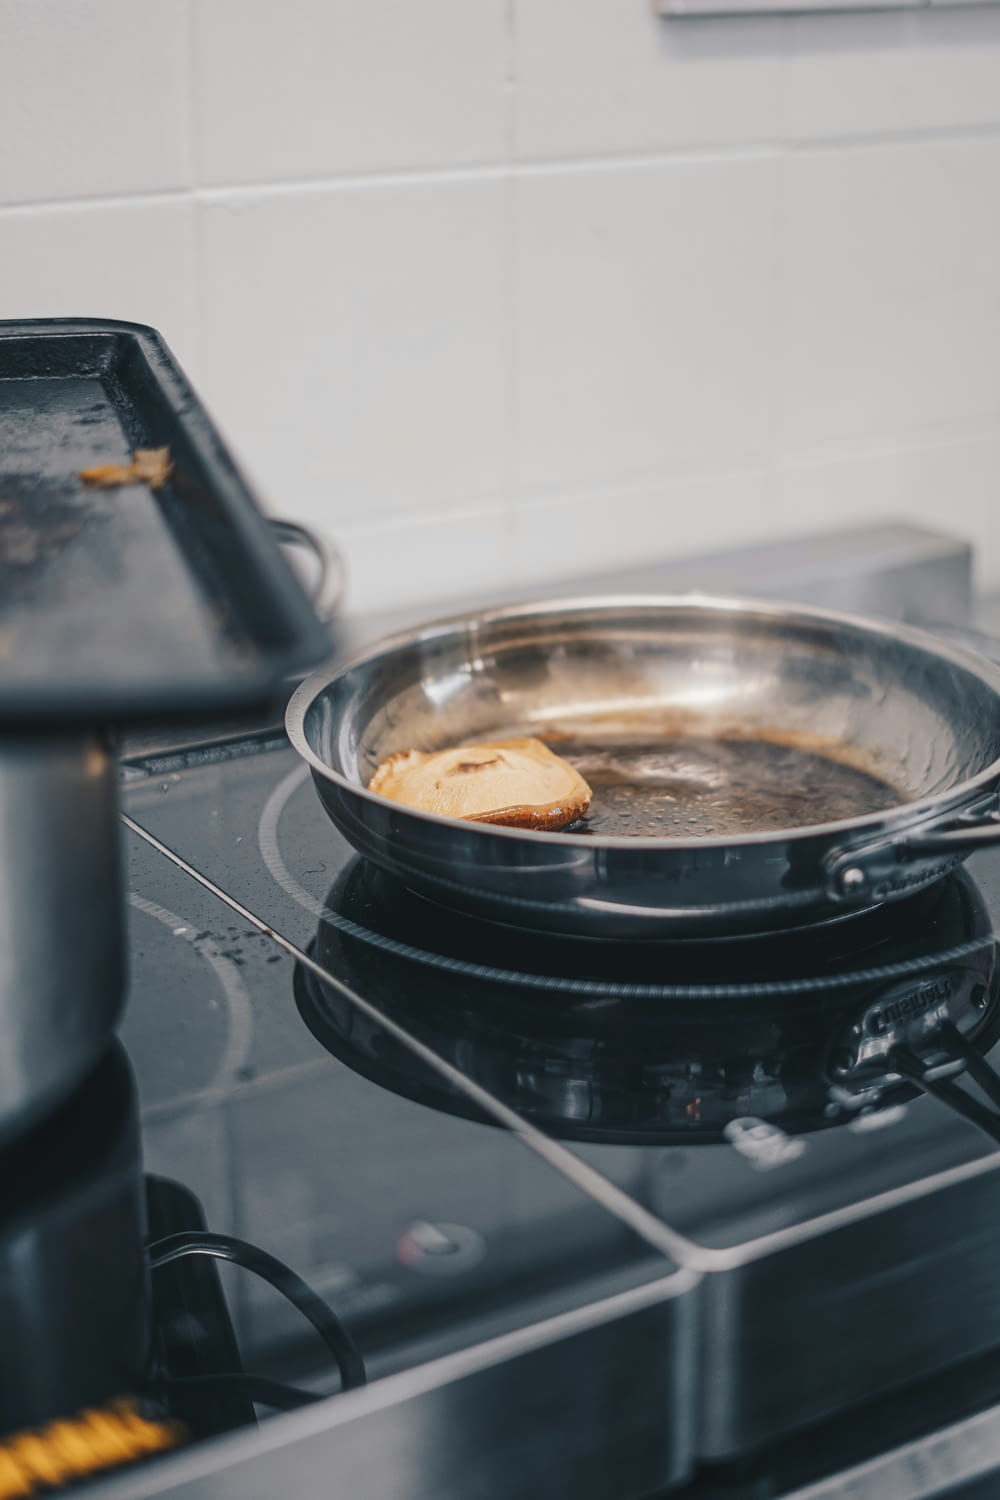 a frying pan on a stove with food cooking in it